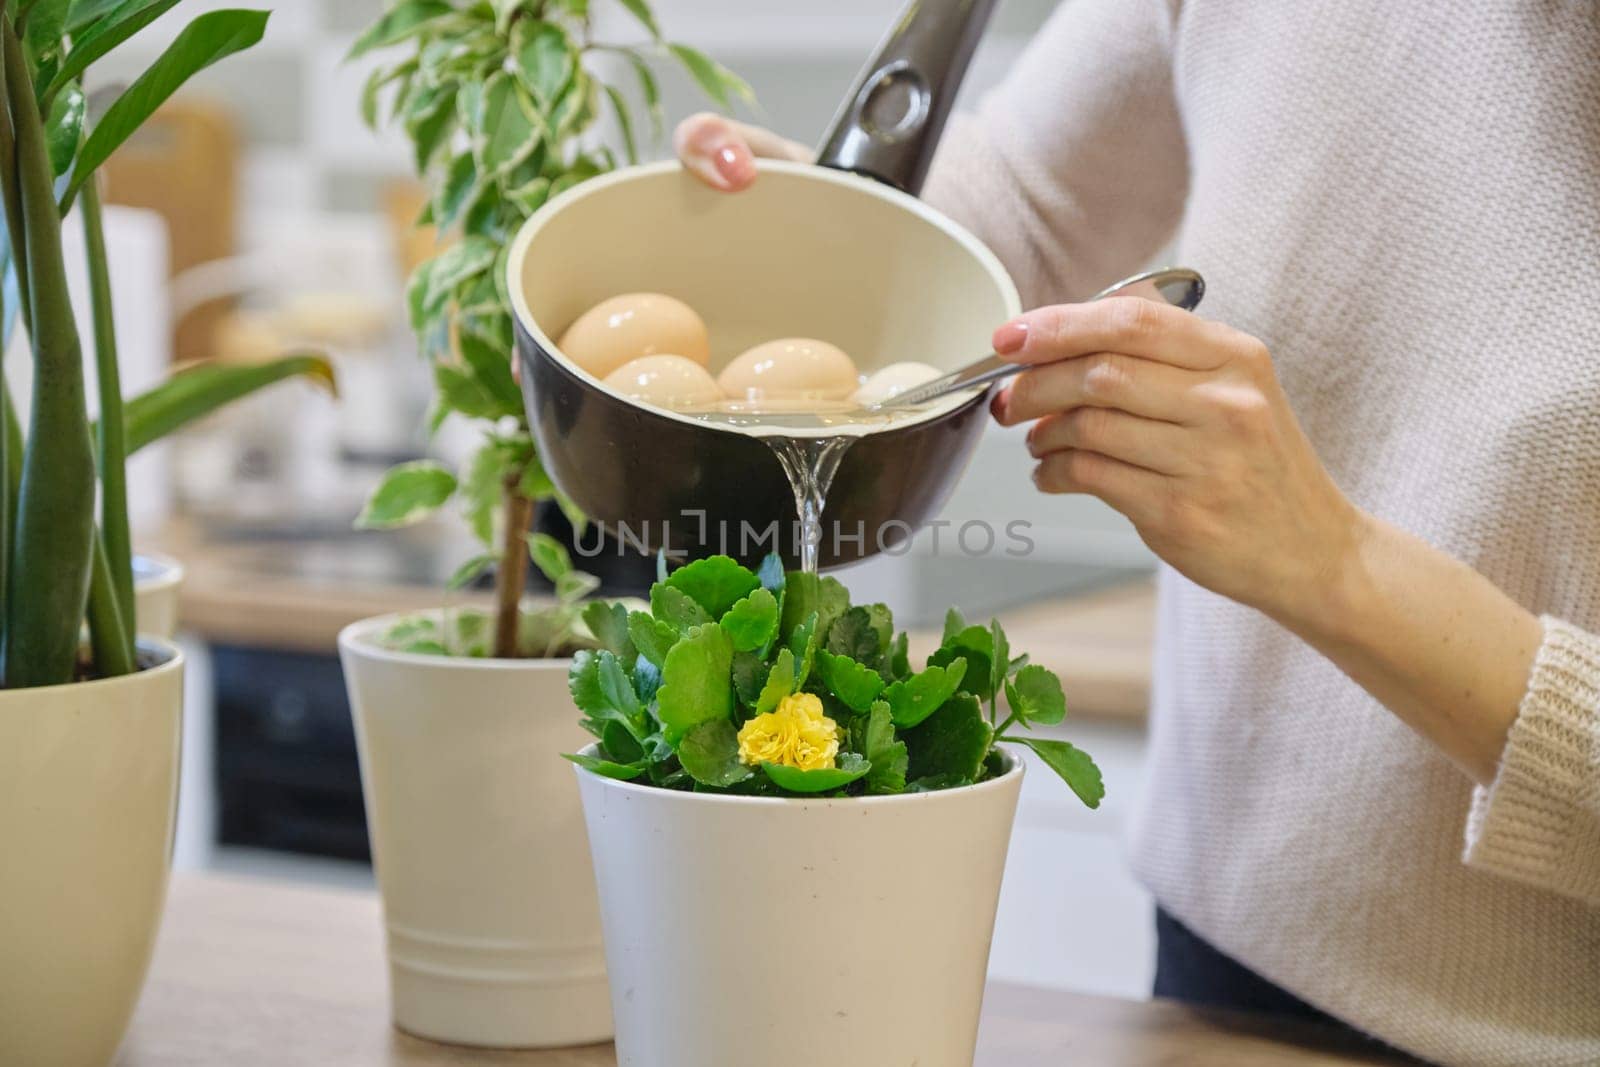 Natural fertilizer water after boiling eggs, woman watering plant in pot.